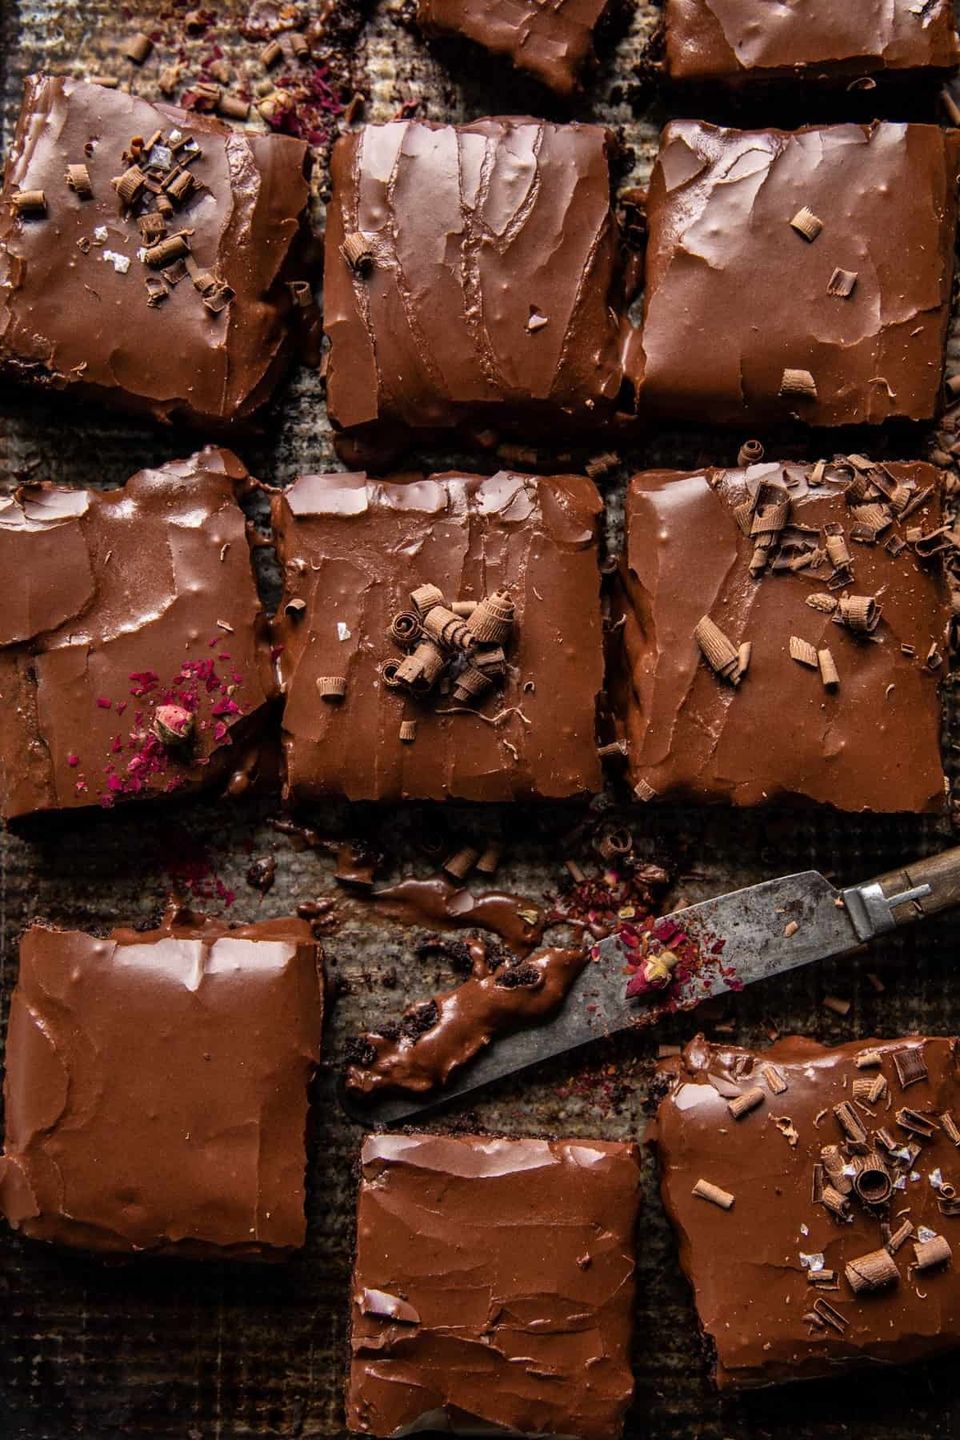 50 Of The Best Dessert Recipes Of All Time Huffpost Life